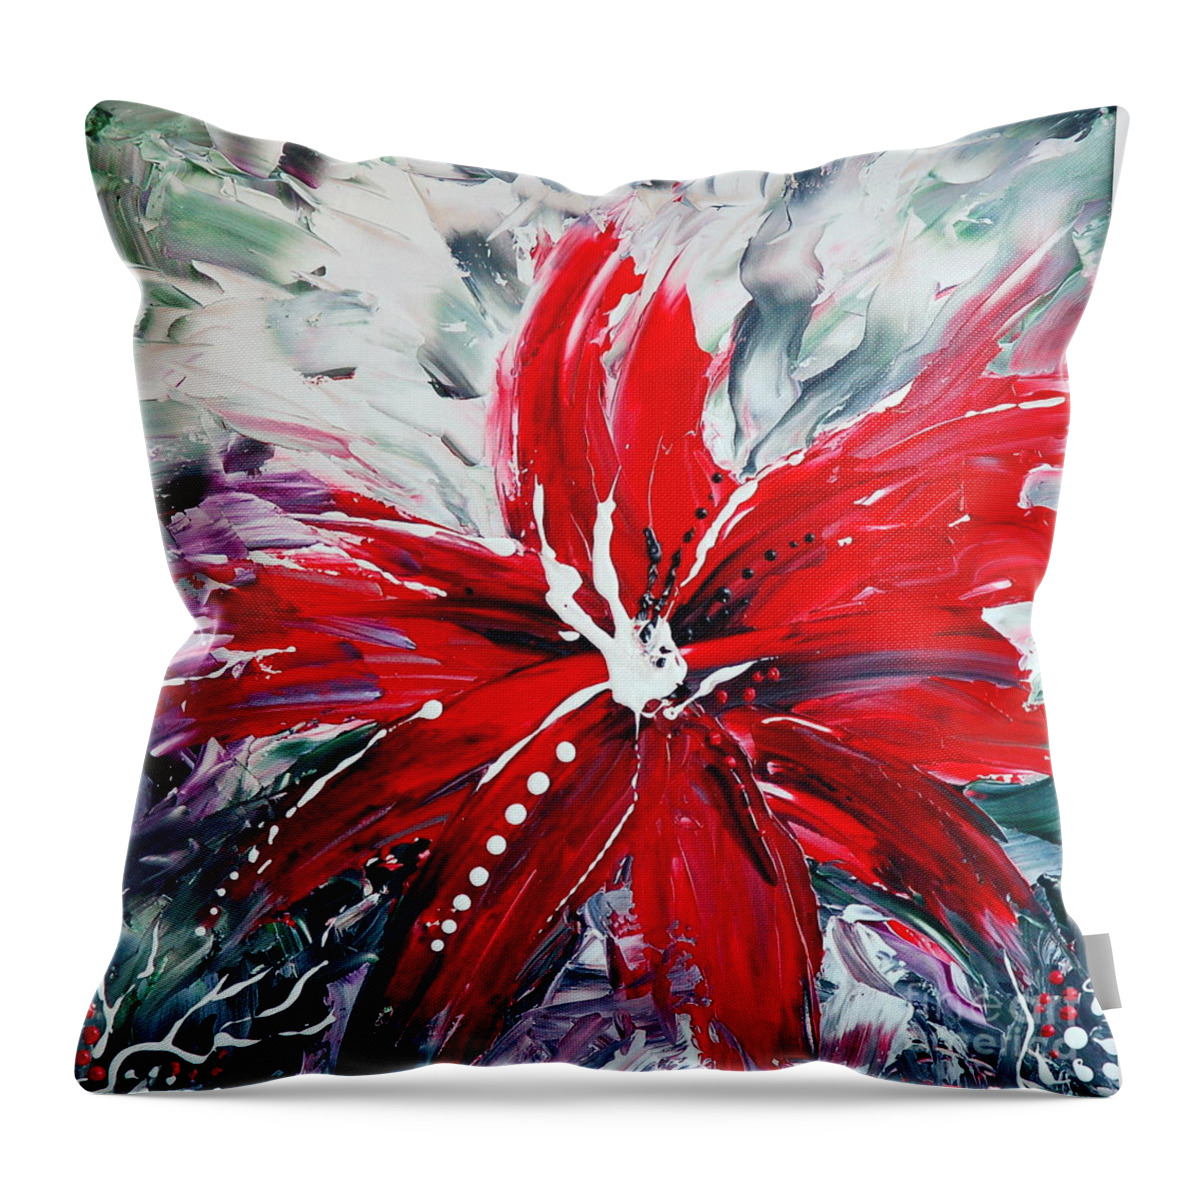 Abstract Throw Pillow featuring the painting Red Beauty by Teresa Wegrzyn